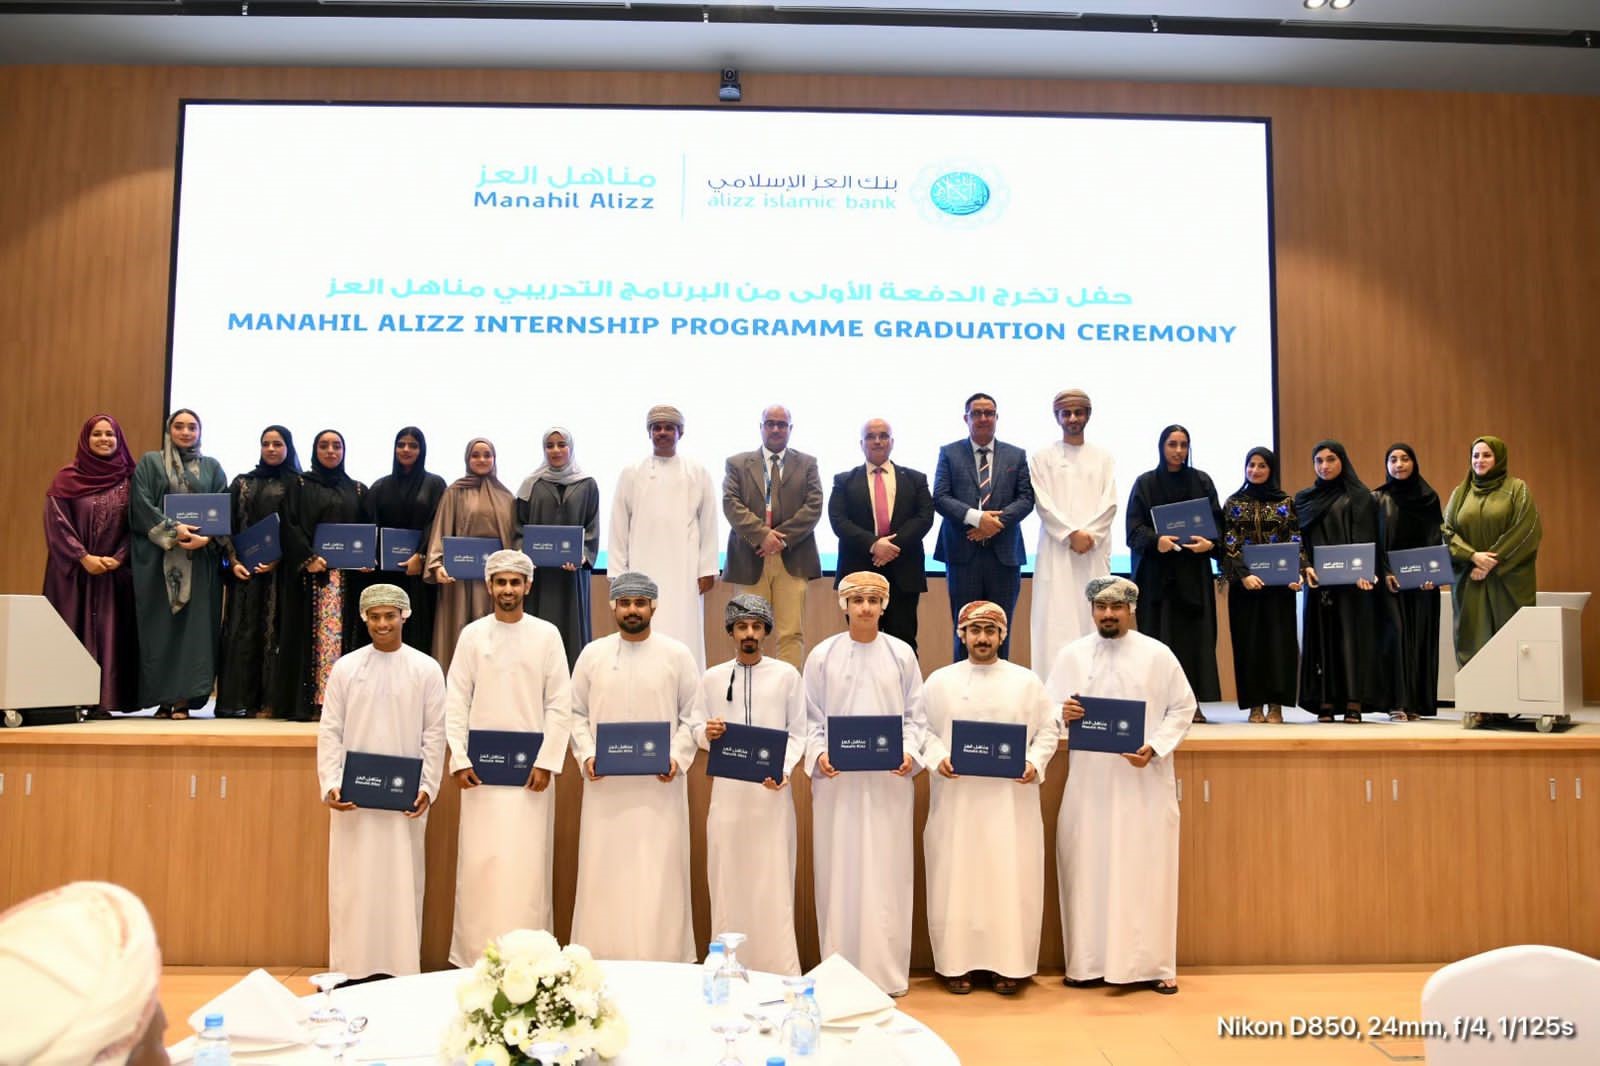 Students of the CCBA Successfully Completed the Training Program at Al Izz Islamic Banks